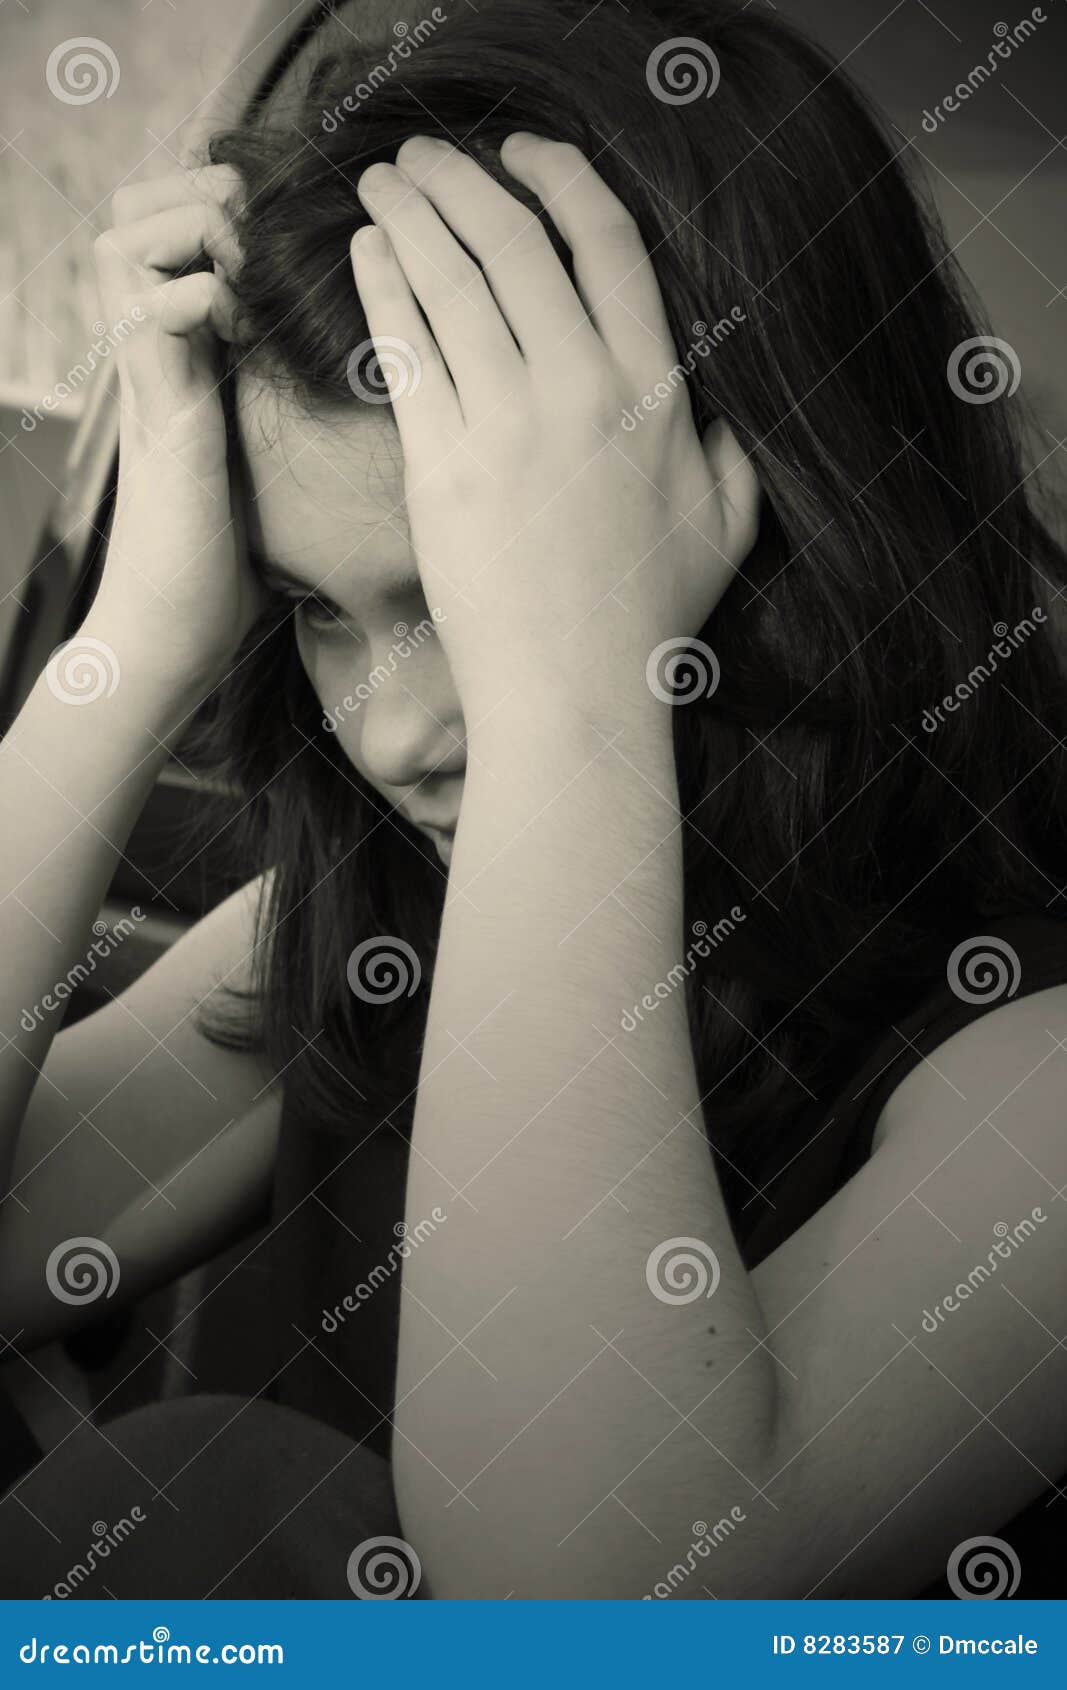 Sad depressed teen girl stock image. Image of grieving - 8283587